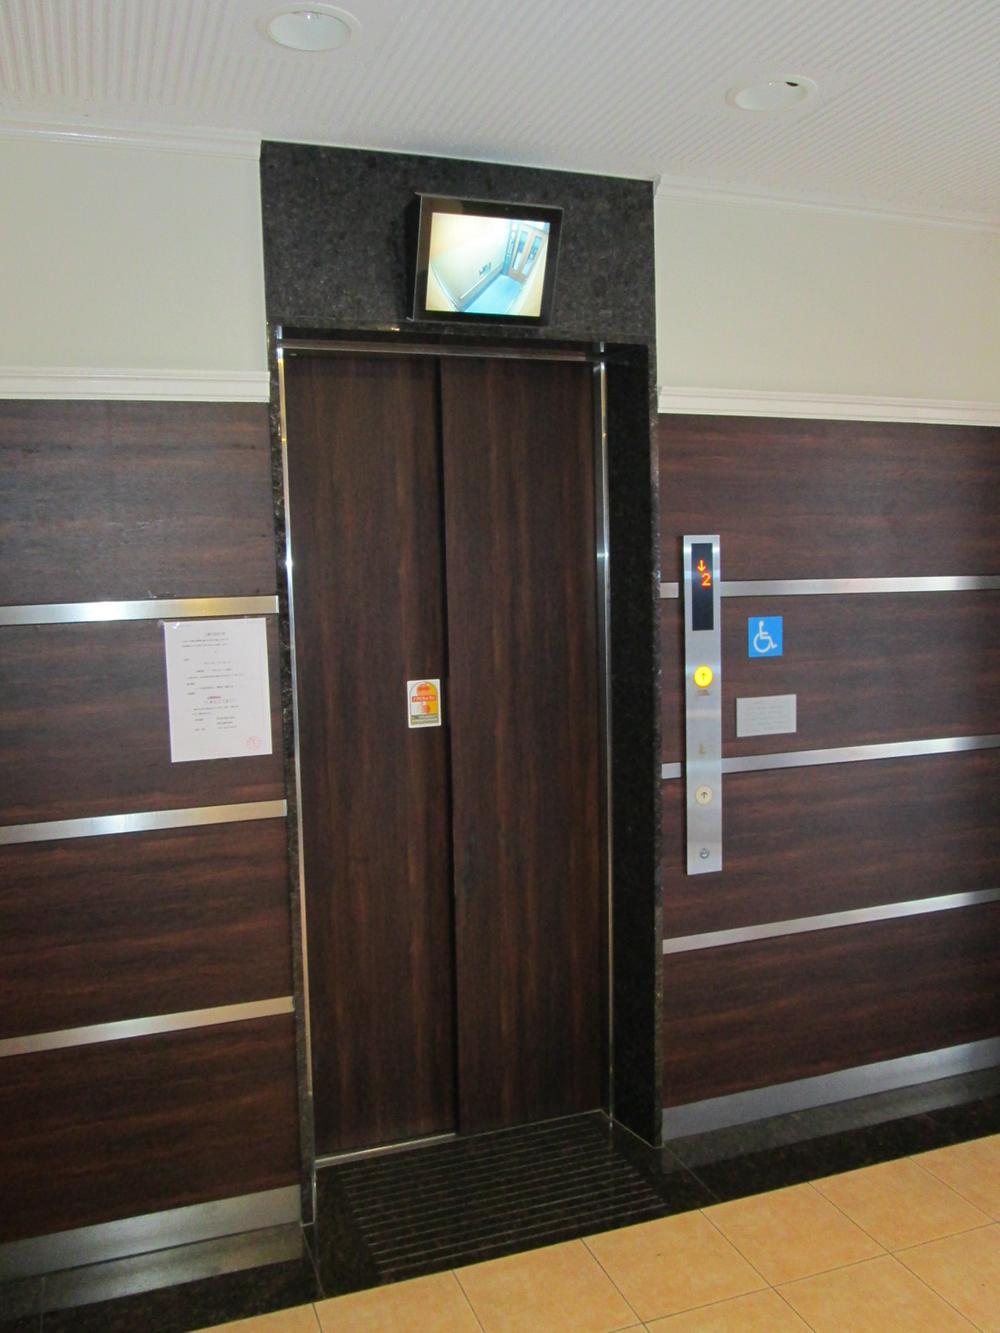 Other common areas. Elevator with a monitor.